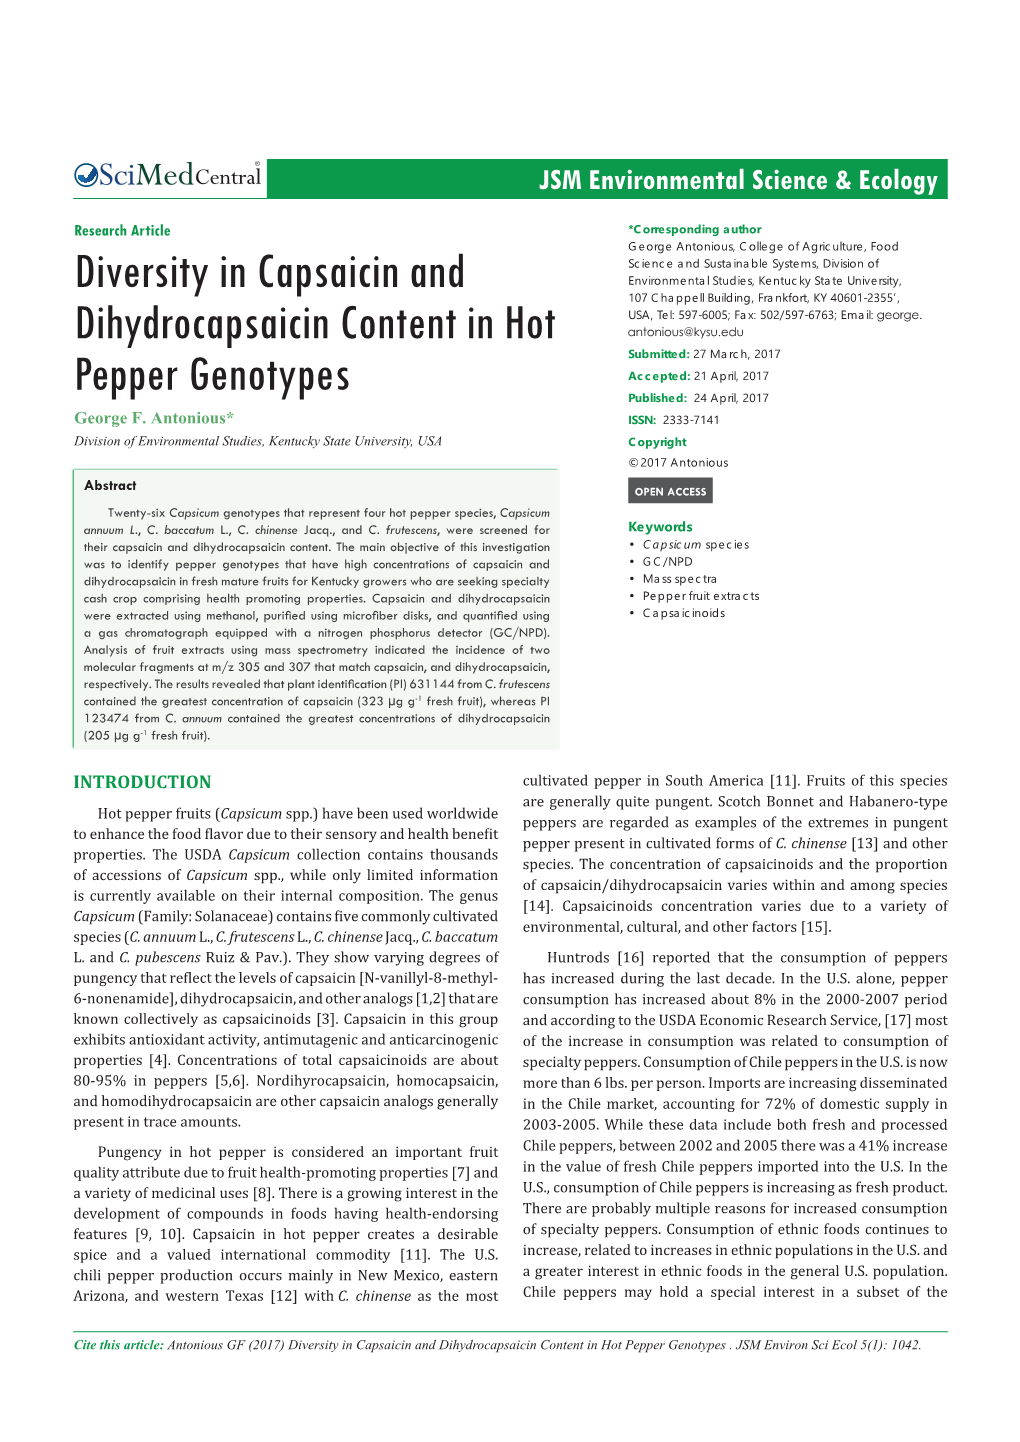 Diversity in Capsaicin and Dihydrocapsaicin Content in Hot Pepper Genotypes